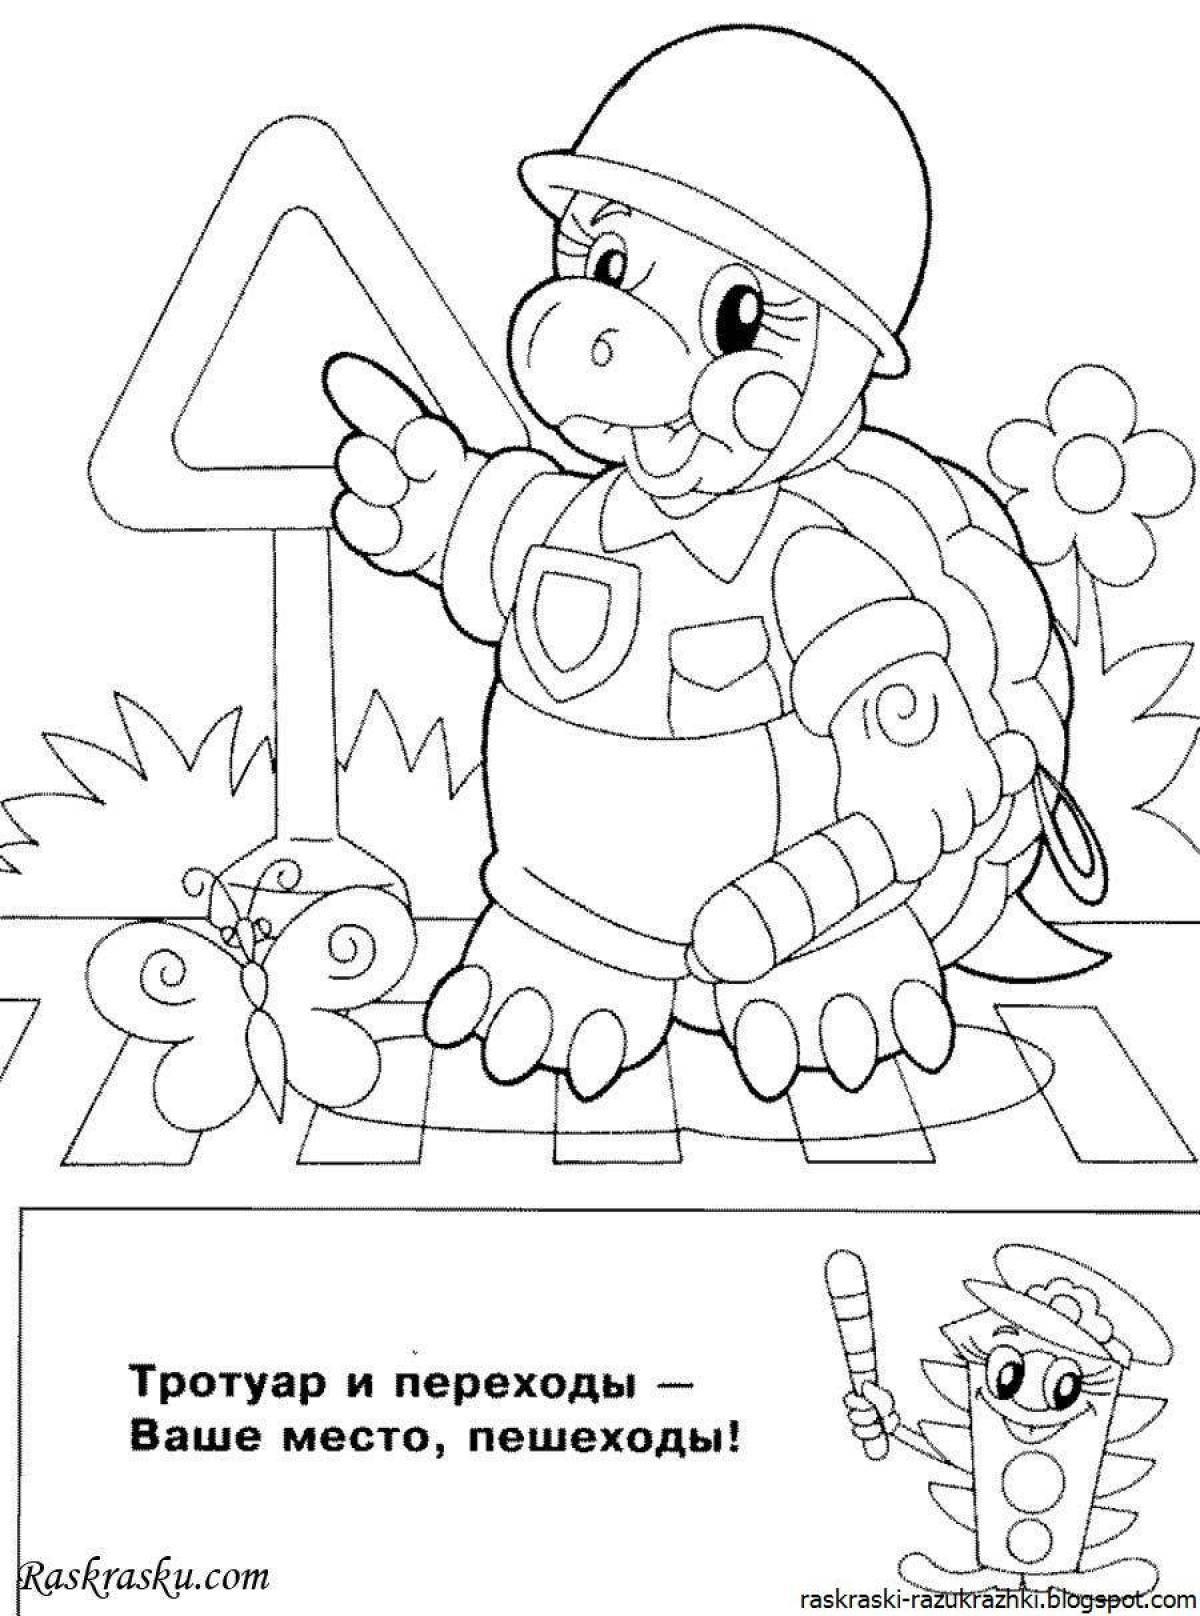 Colorful traffic rules coloring pages for kids